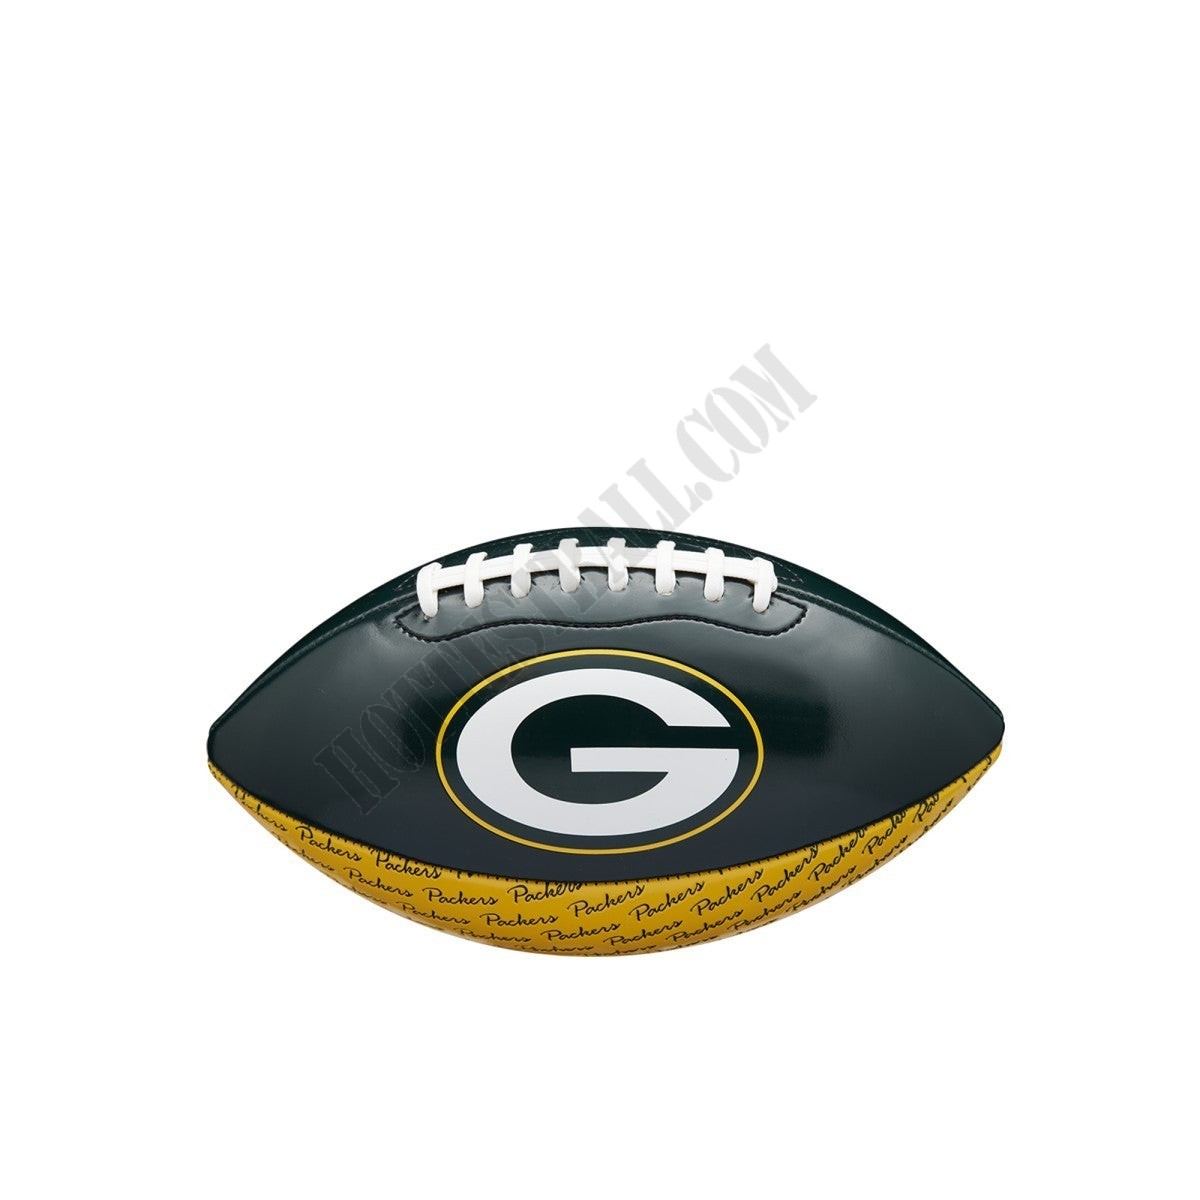 NFL City Pride Football - Green Bay Packers ● Wilson Promotions - -0